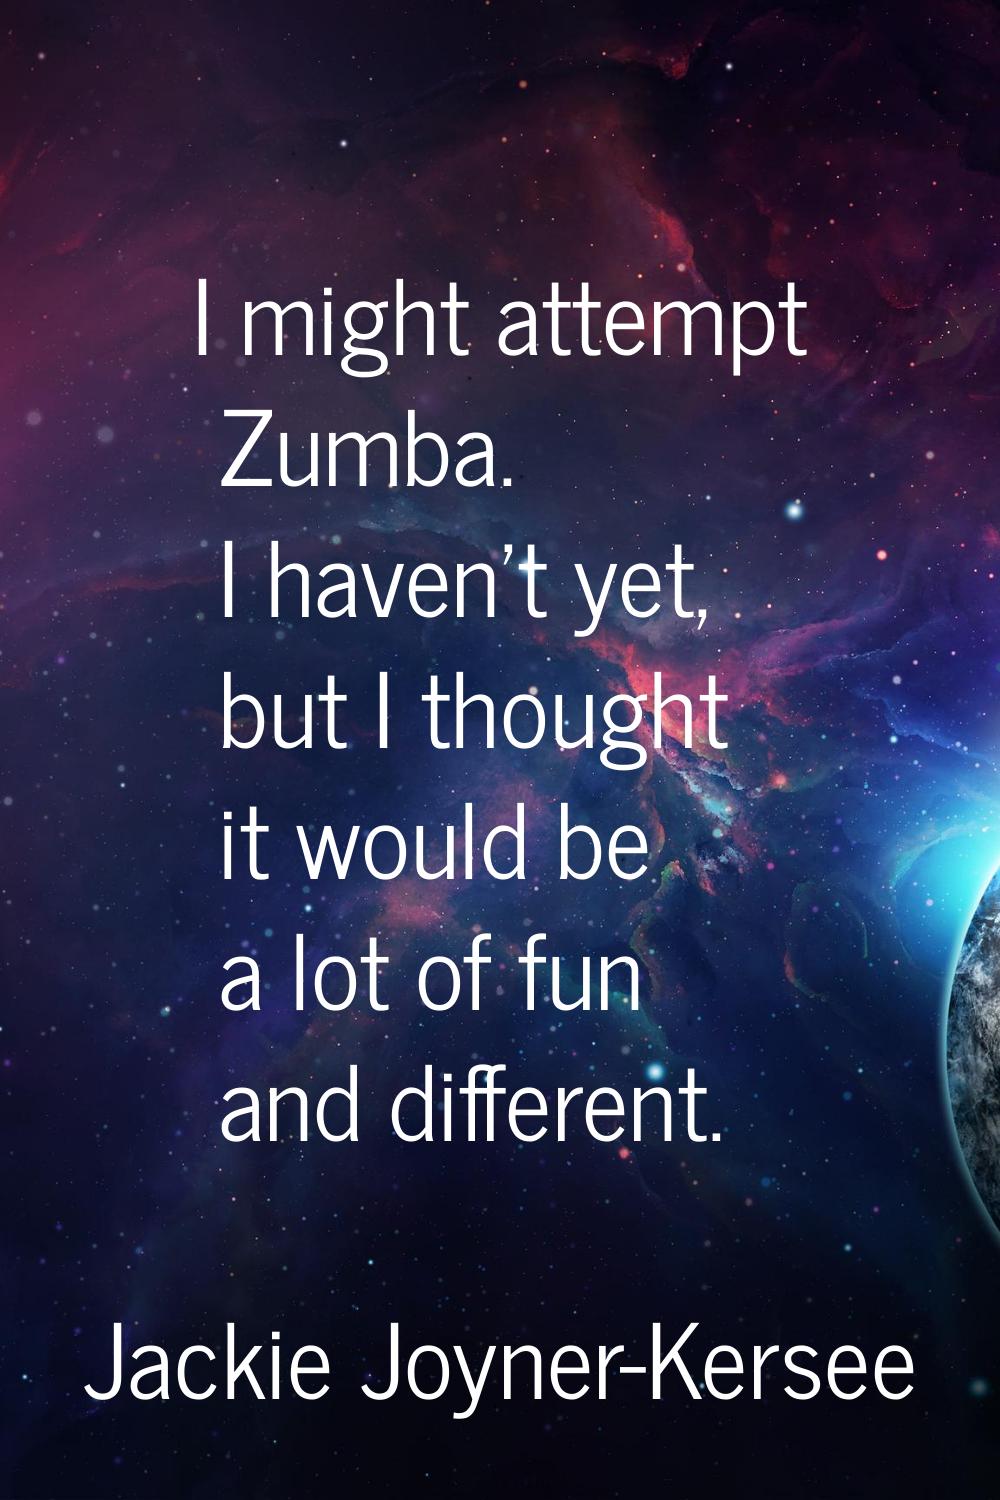 I might attempt Zumba. I haven't yet, but I thought it would be a lot of fun and different.